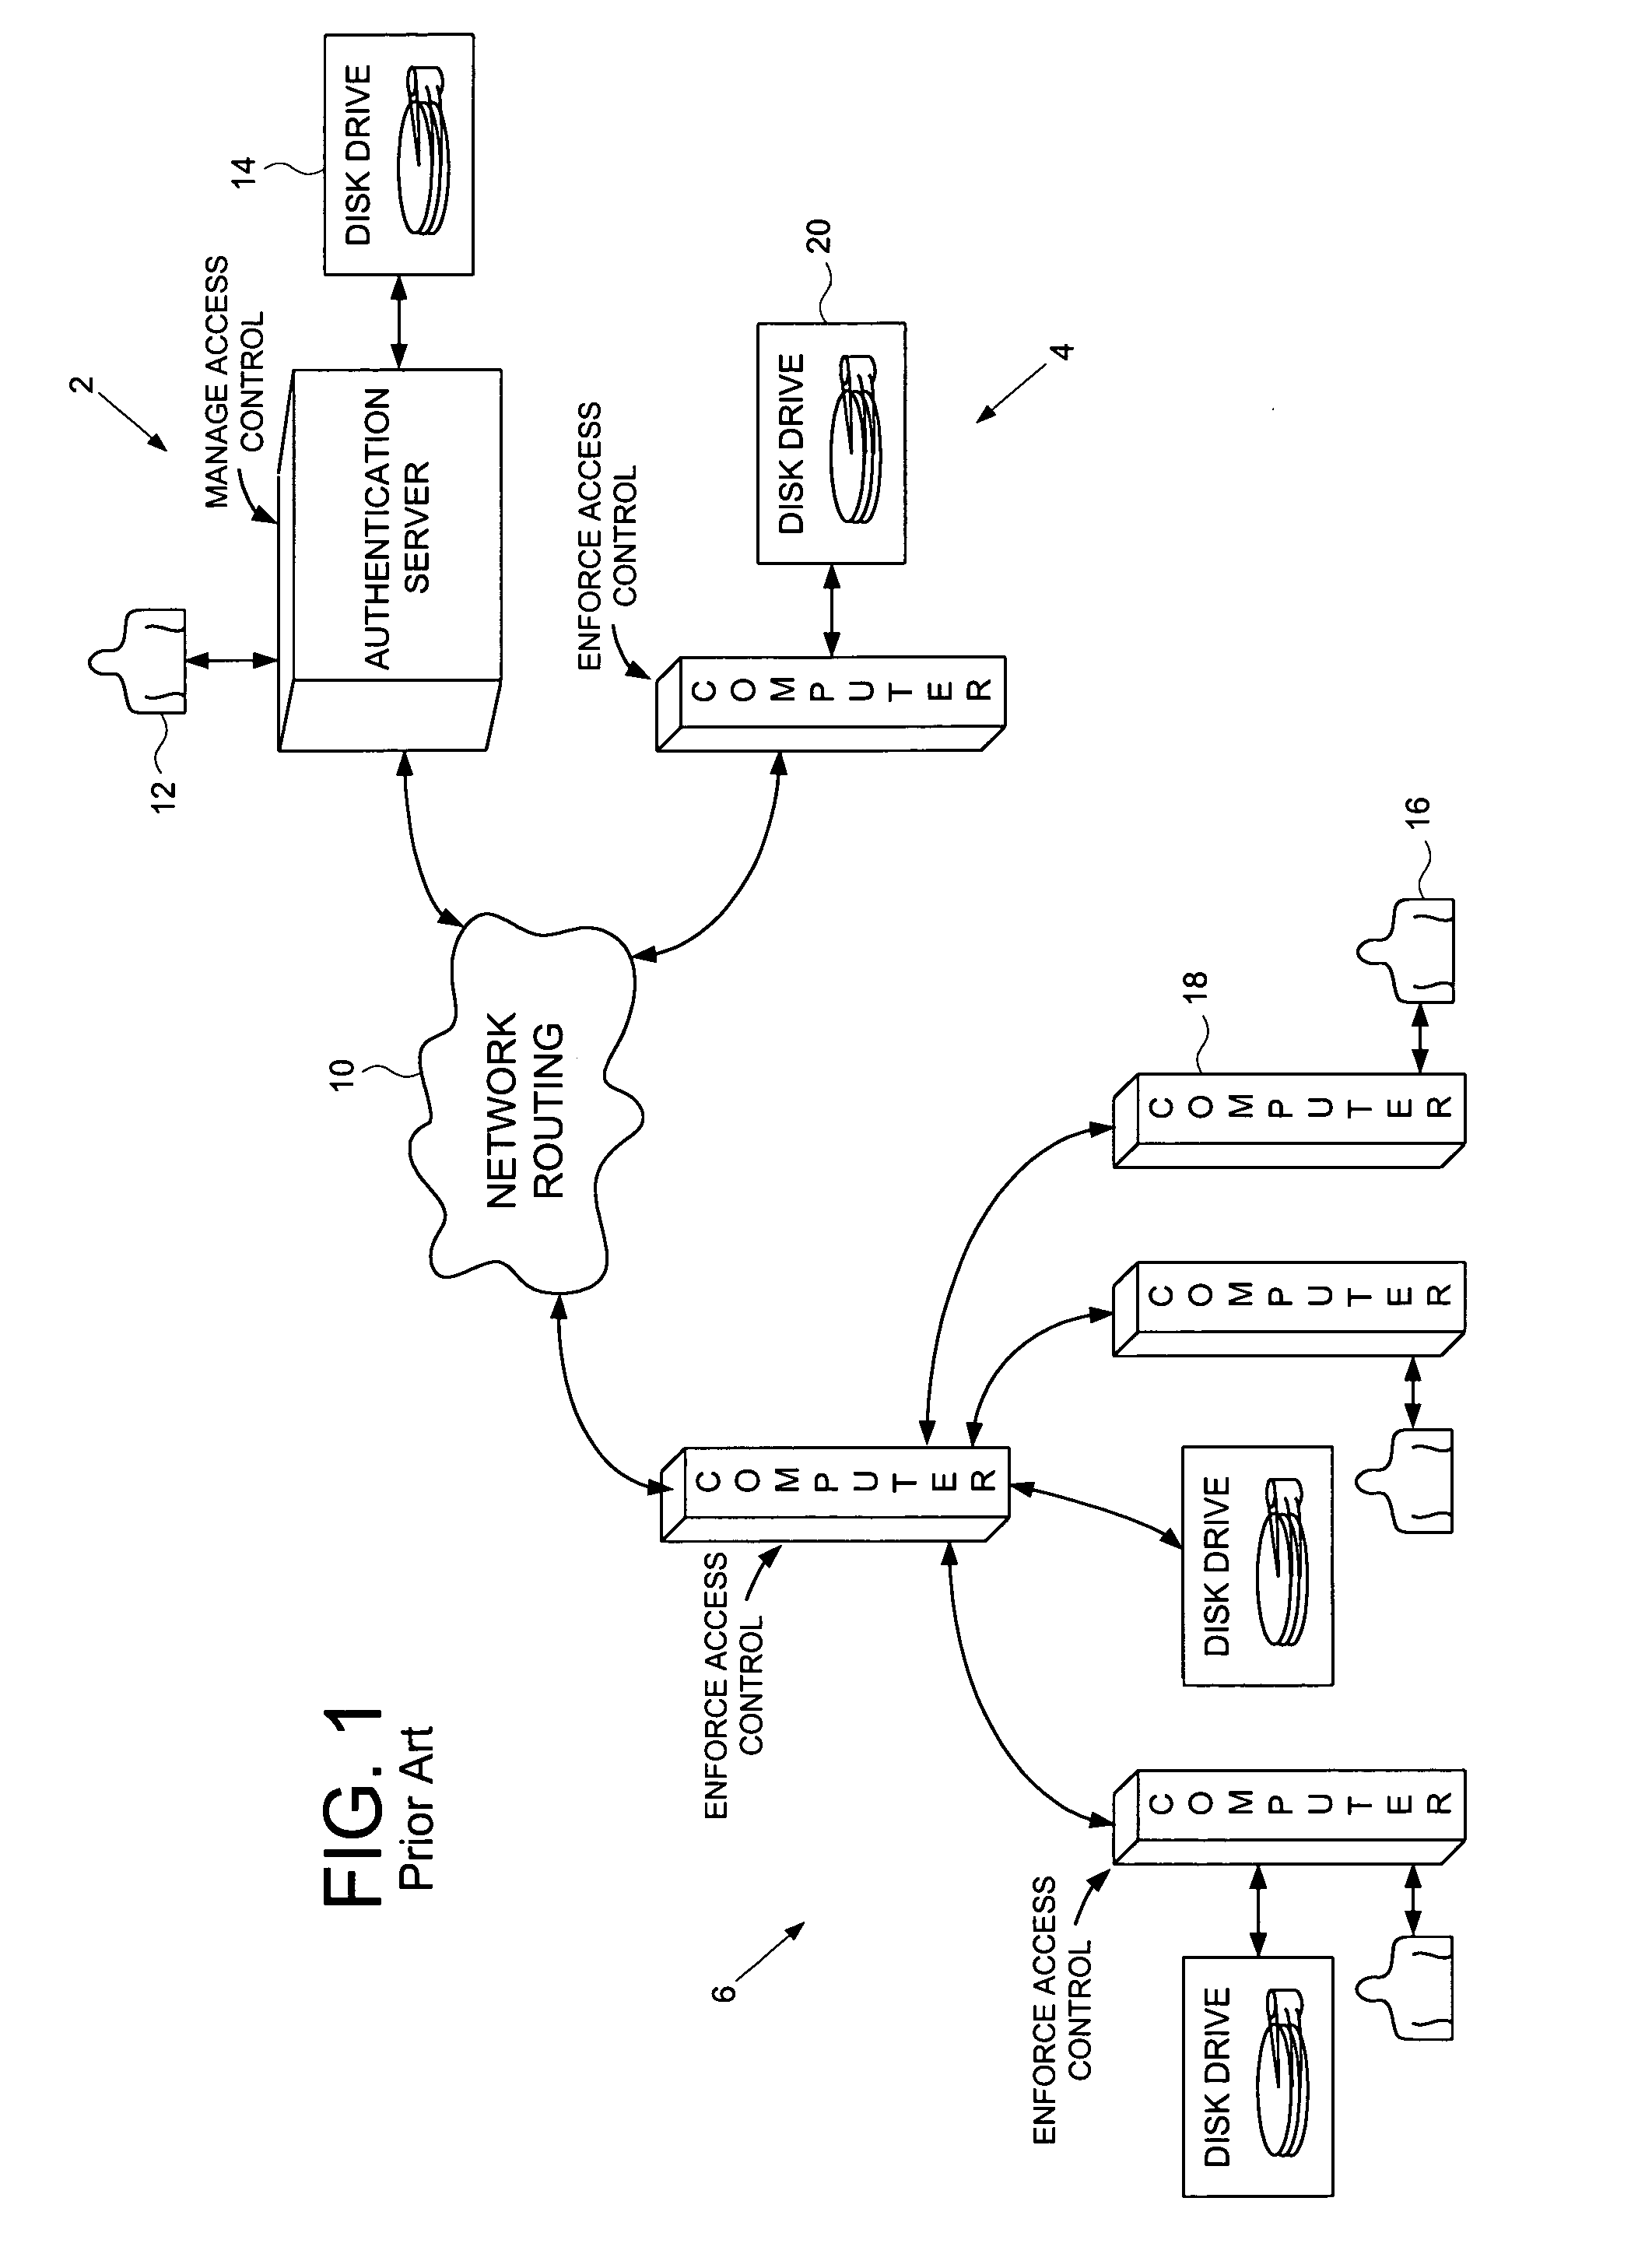 Computer network comprising network authentication facilities implemented in a disk drive